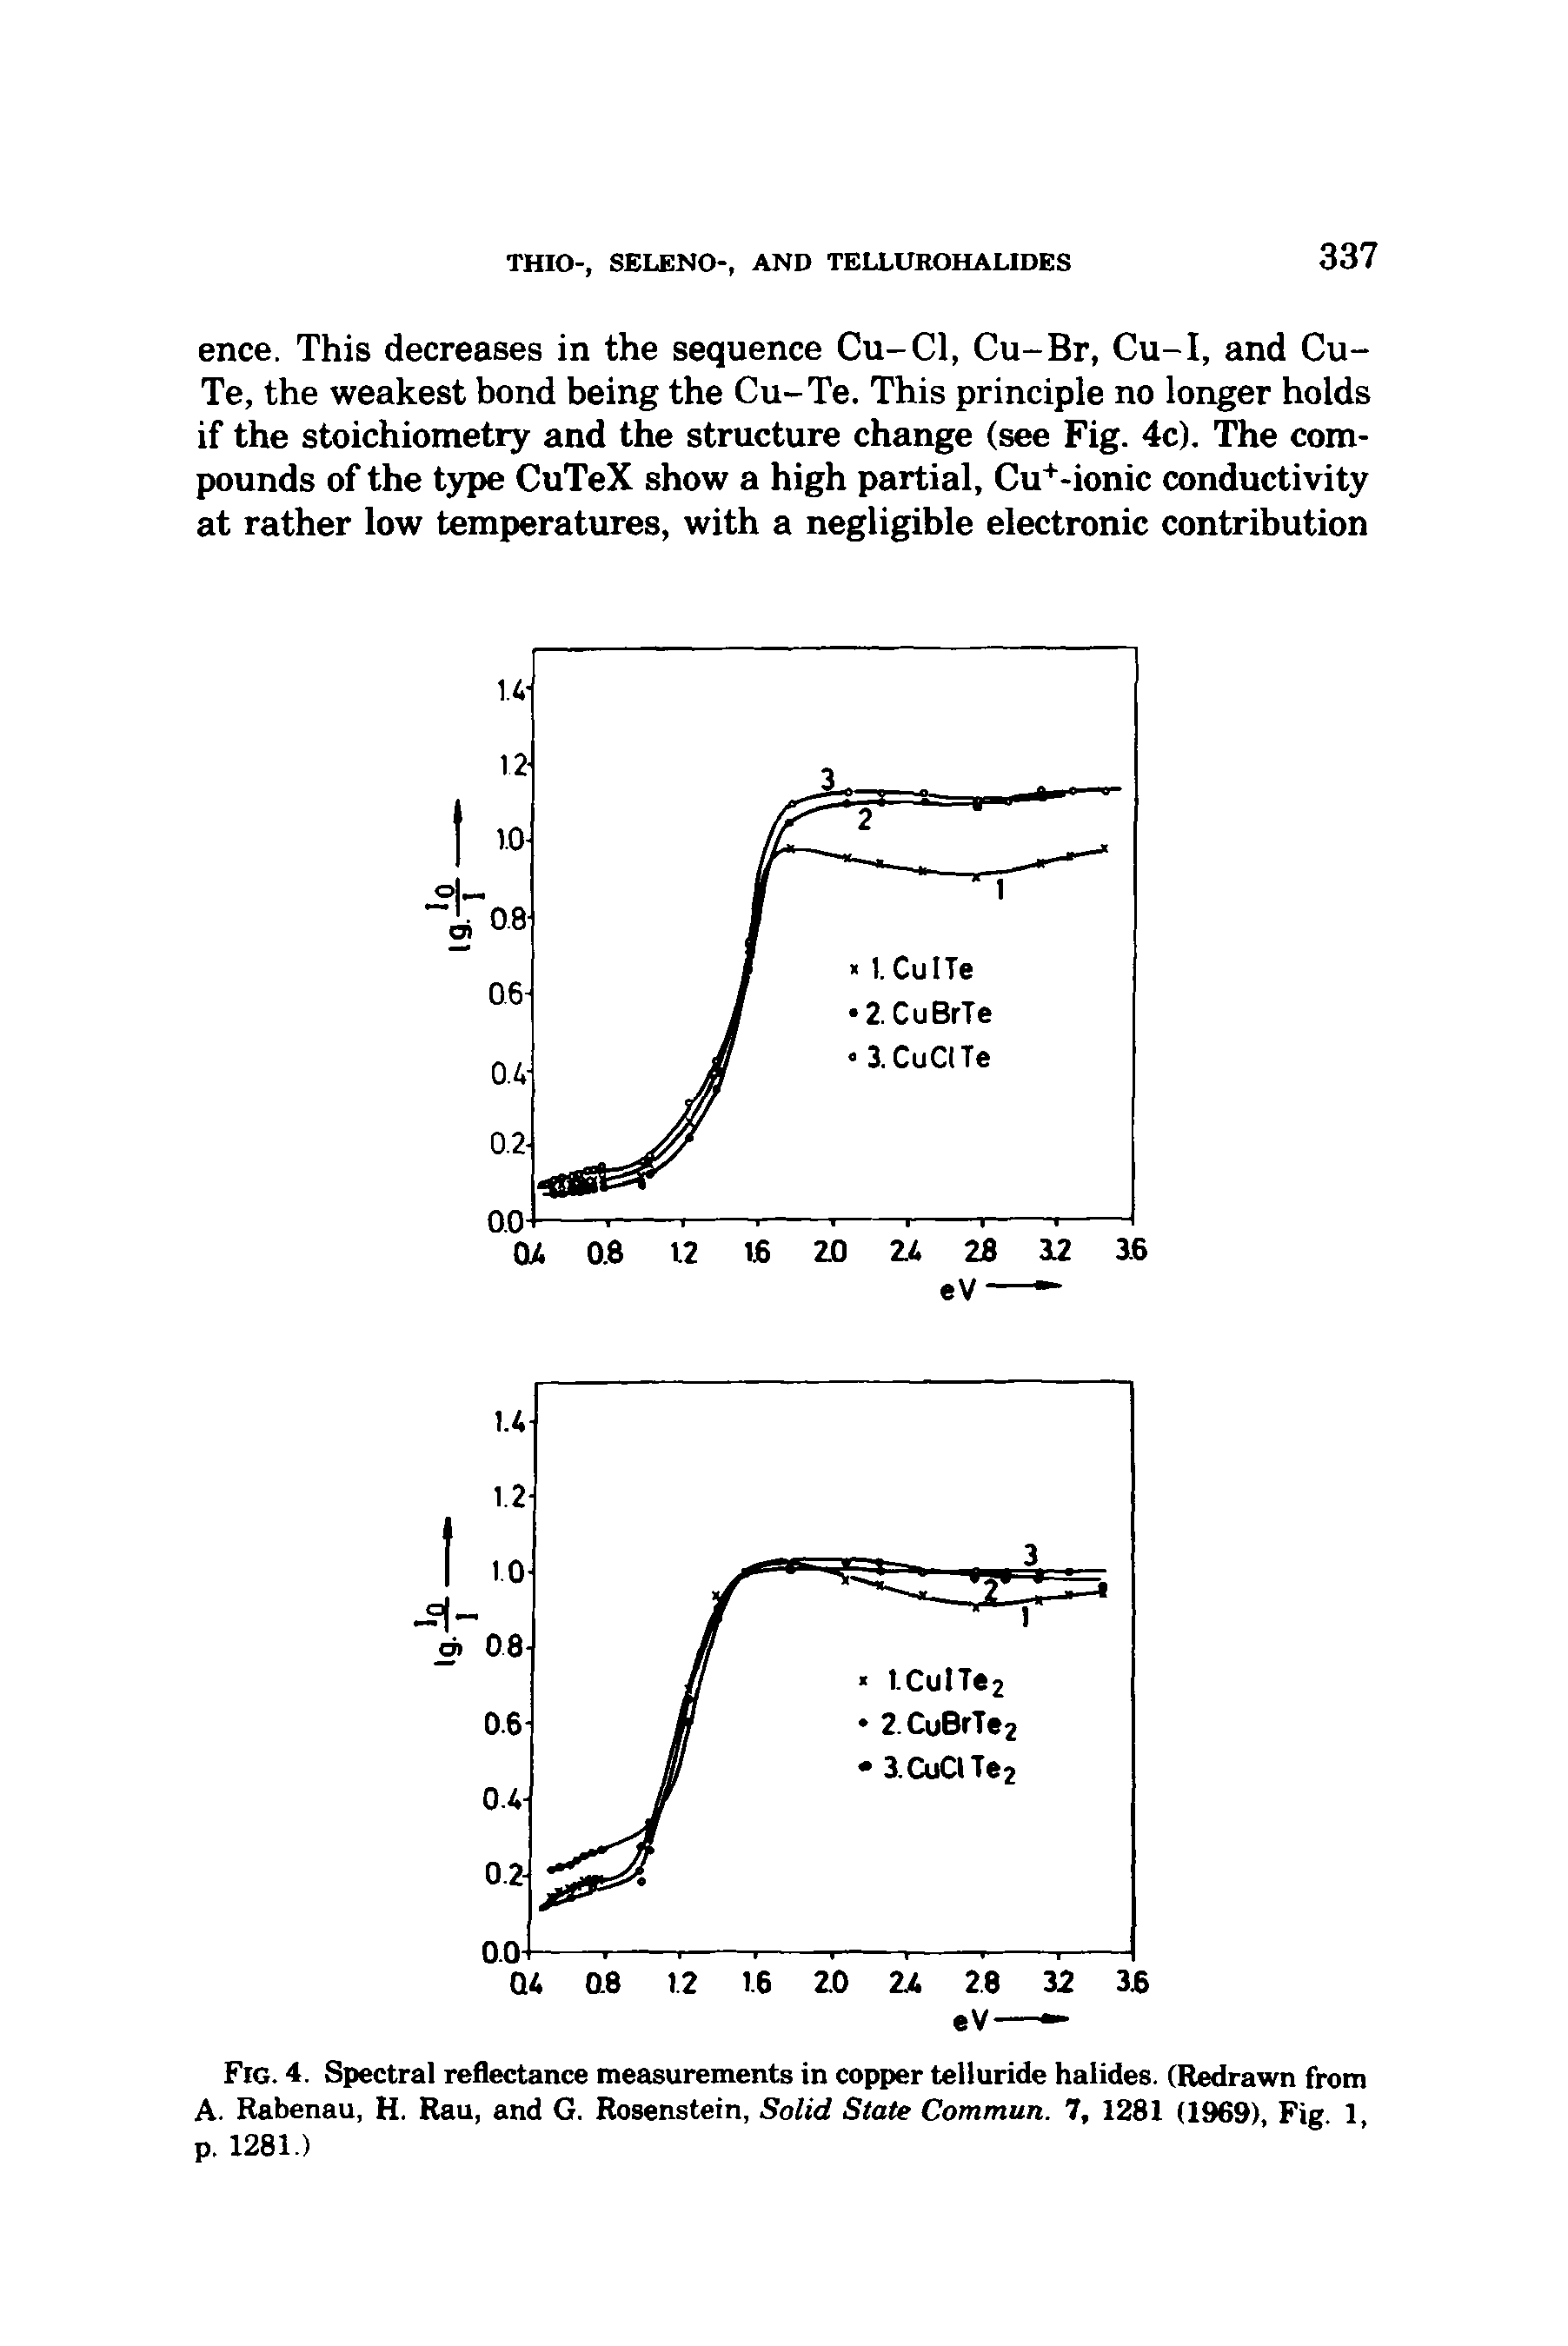 Fig. 4. Spectral reflectance measurements in copper telluride halides. (Redrawn from A. Rabenau, H. Rau, and G. Rosenstein, Solid State Commun. 7, 1281 (1969), Fig. 1,...